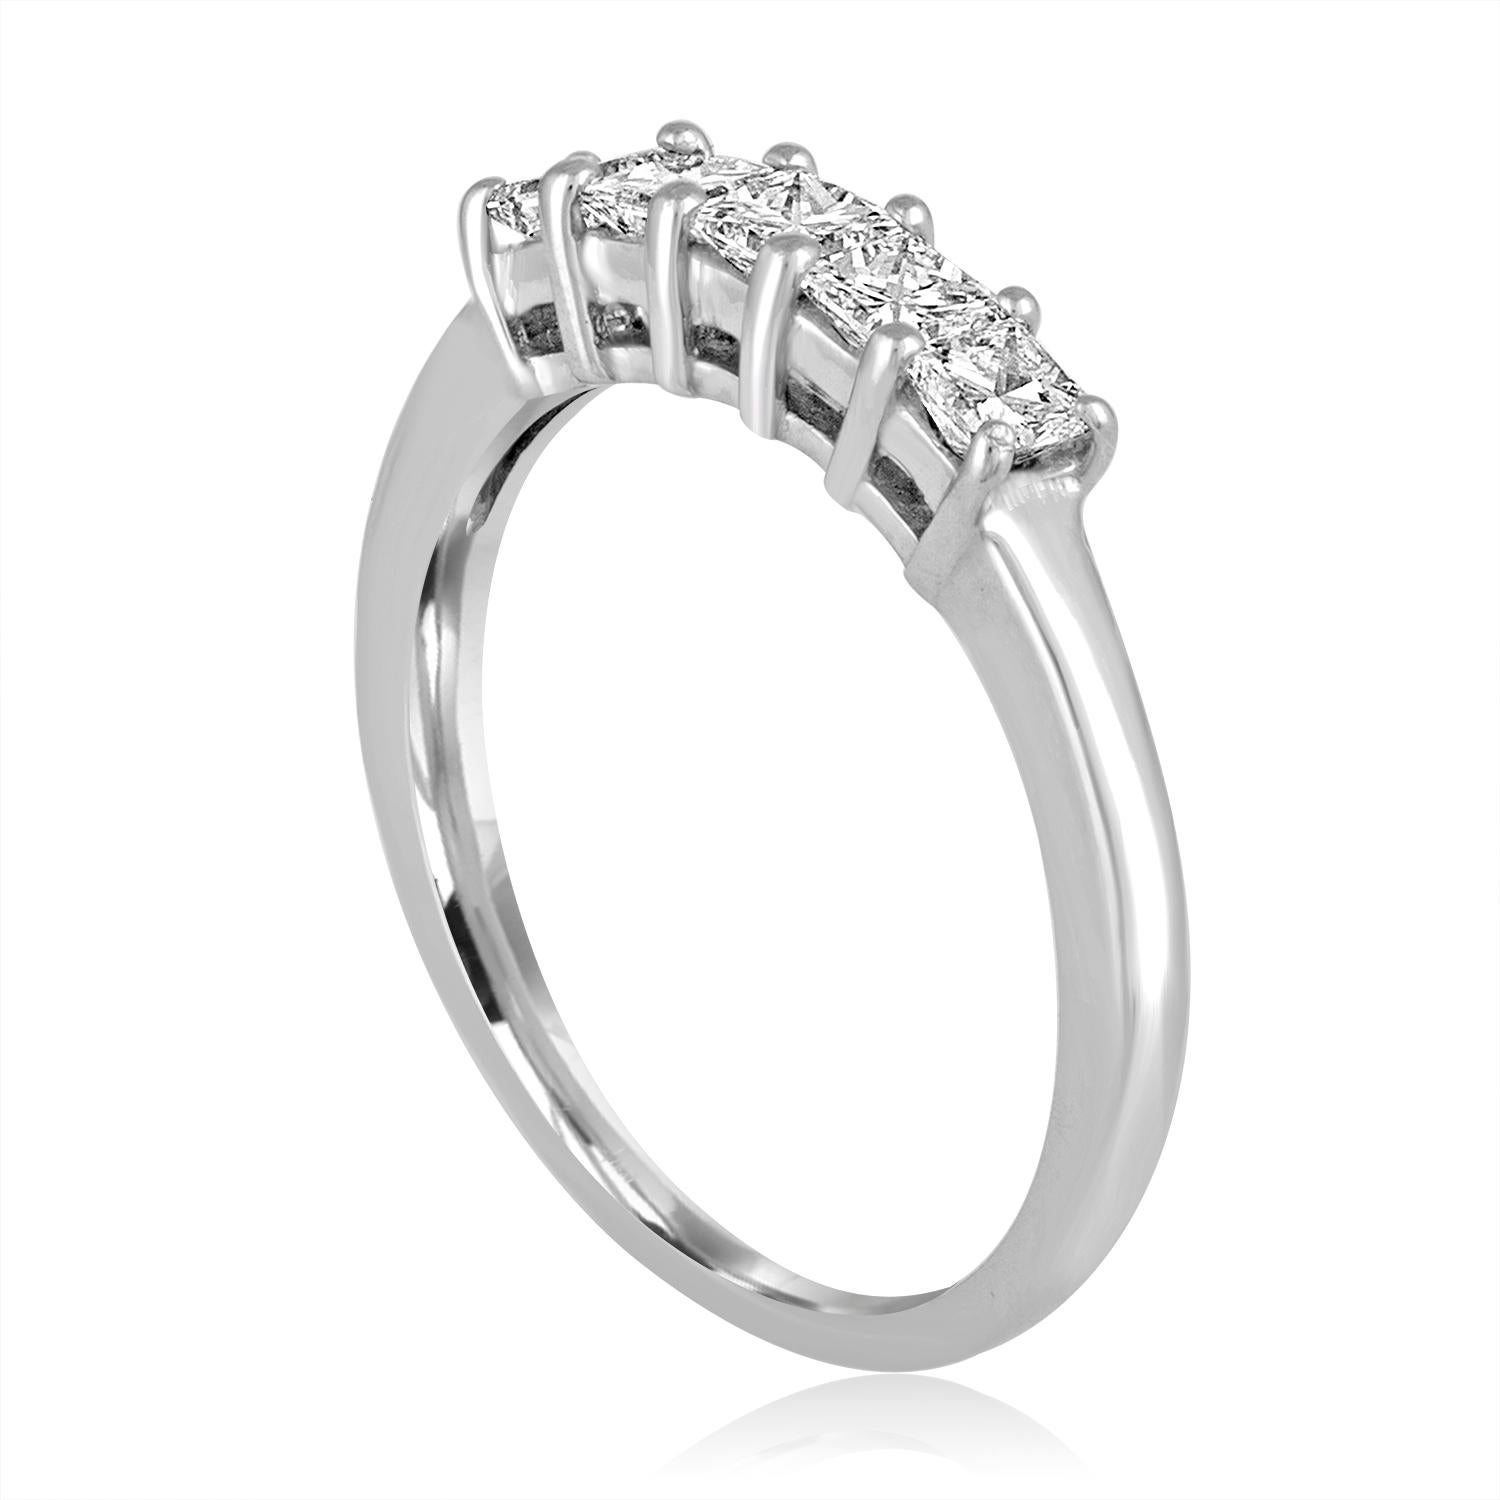 Very Beautiful Diamond Half Band Ring
The ring is 14K White Gold
There are 5 Princess Cut Diamonds prong set
There are 0.50 Carats In Diamonds G/H SI
The ring is a size 5.5, sizable. 
The ring weighs 2.0 grams.